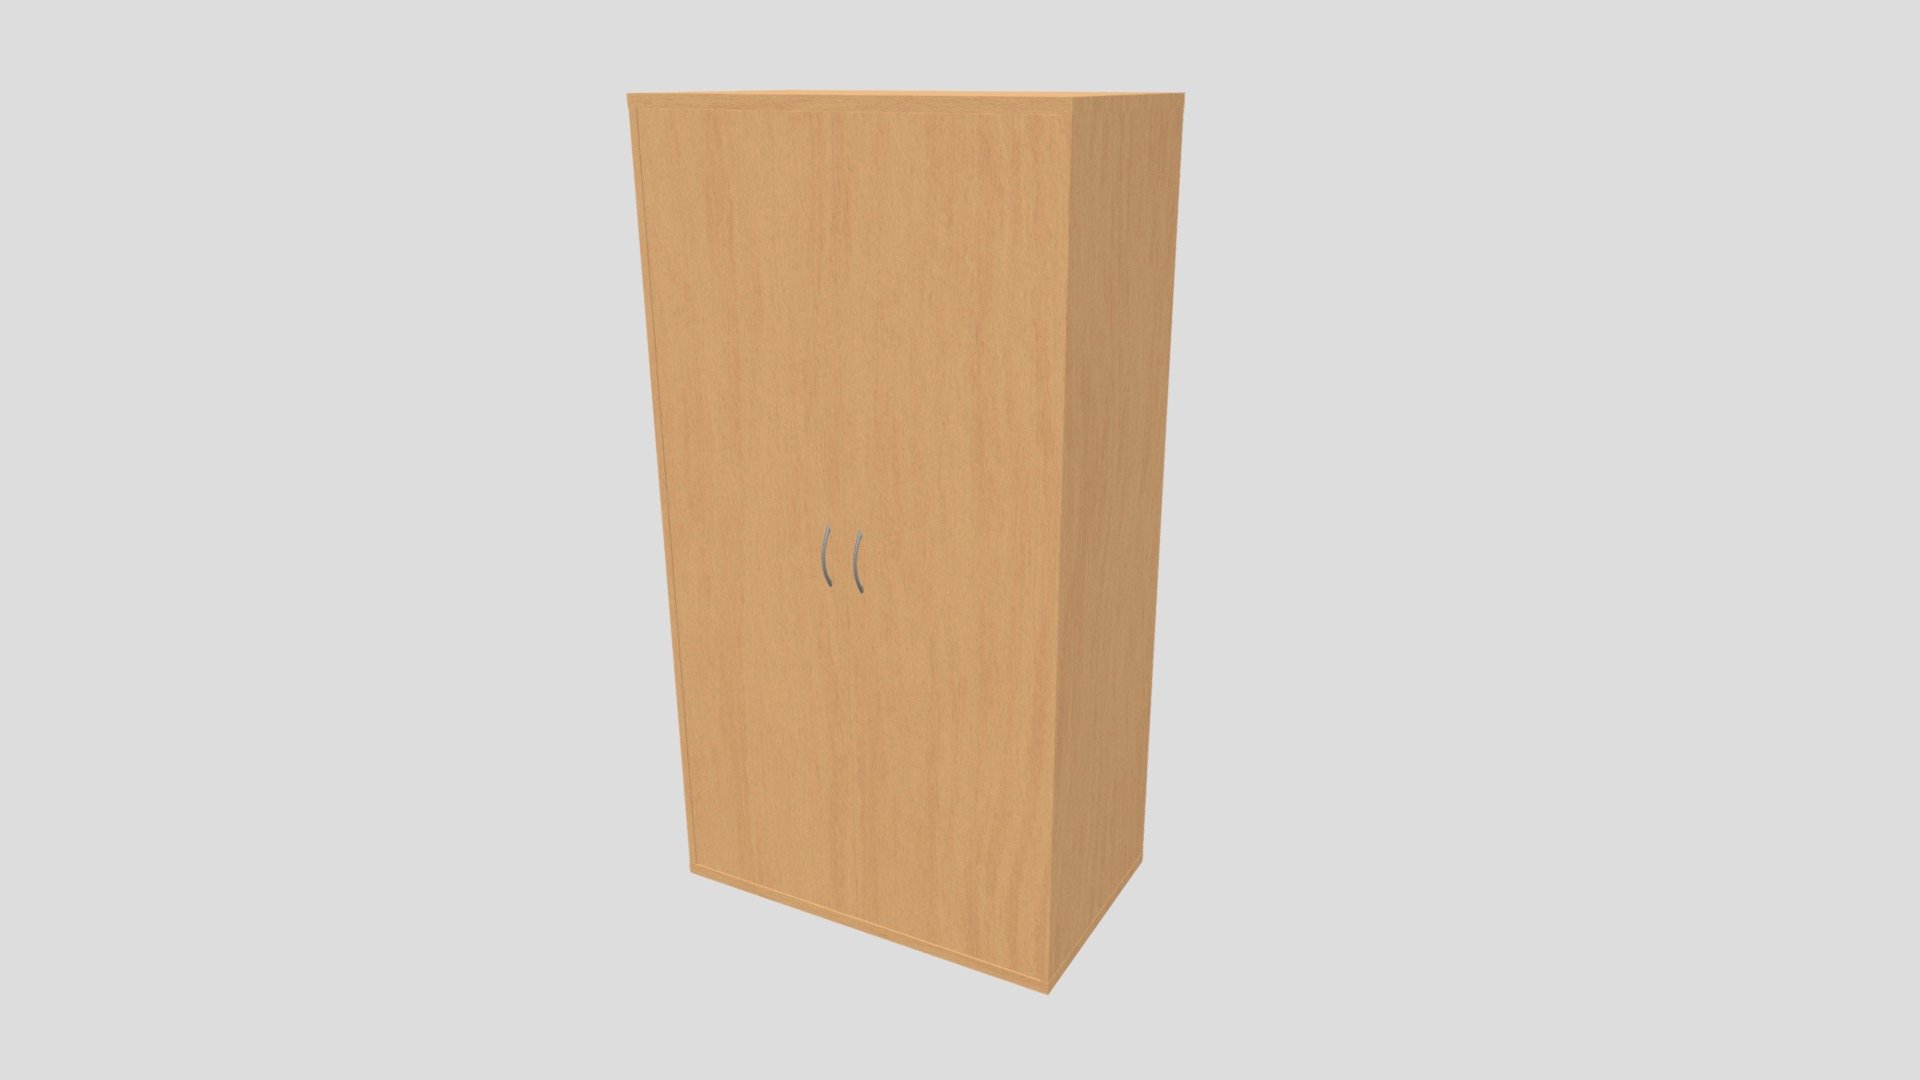 Textures: 2048 x 2048, Three colors on texture: Grey, Black, Yellow colors.

Has Normal Map: 2048 x 2048.

Rigged.

Materials: 2 - Wood, metal.

Smooth and flat shaded.

Mirrored.

Subdivision Level: 0

Origin located on bottom-center.

Polygons: 5100

Vertices: 2584

Formats: Fbx, Obj, Stl, Dae.

I hope you enjoy the model! - Cupboard - Buy Royalty Free 3D model by Ed+ (@EDplus) 3d model